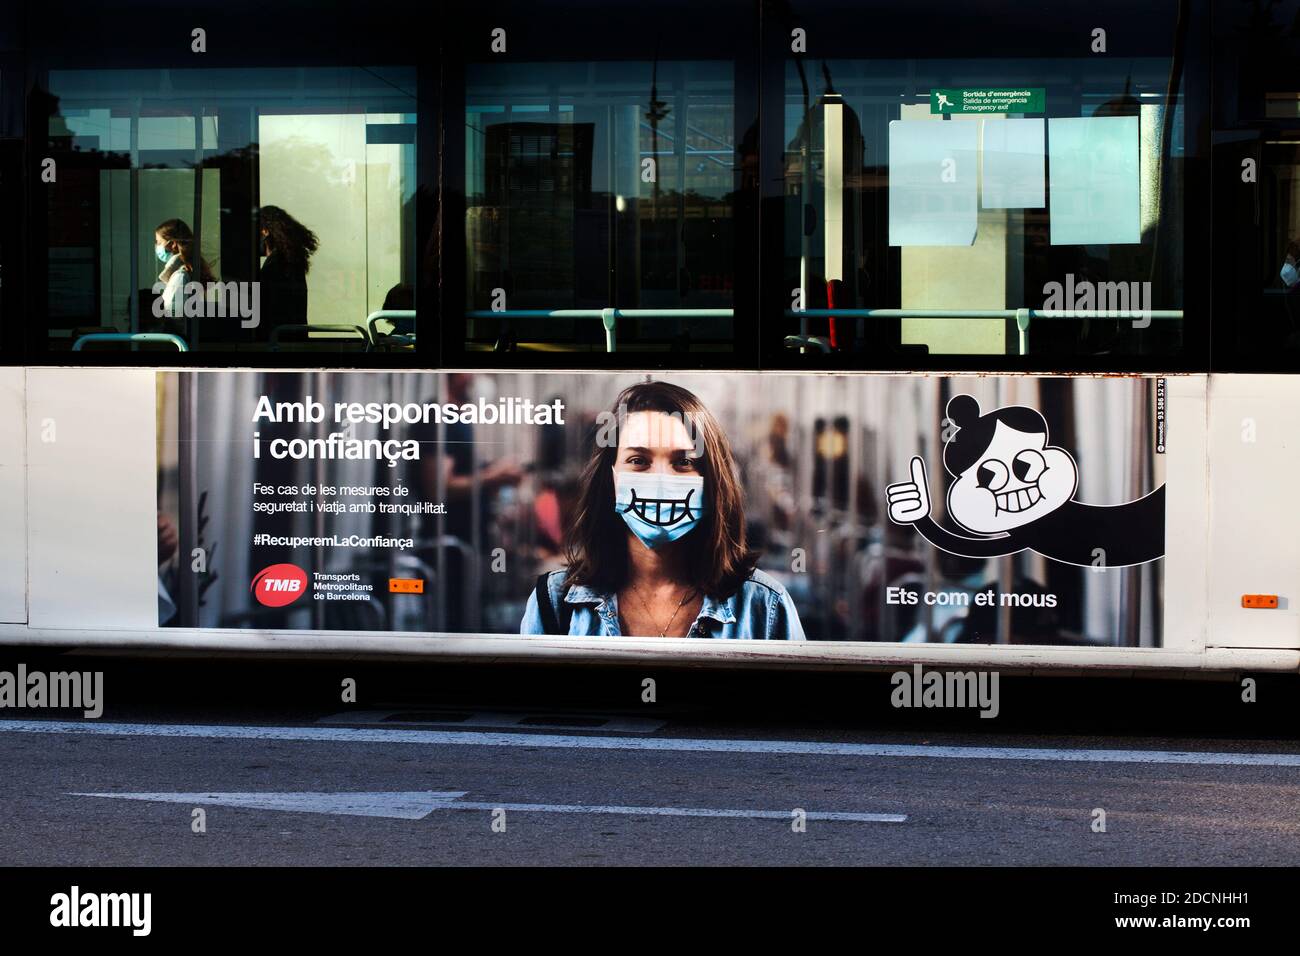 Ad on side of bus asking people to be responsible and trust, Barcelona, Spain. Stock Photo